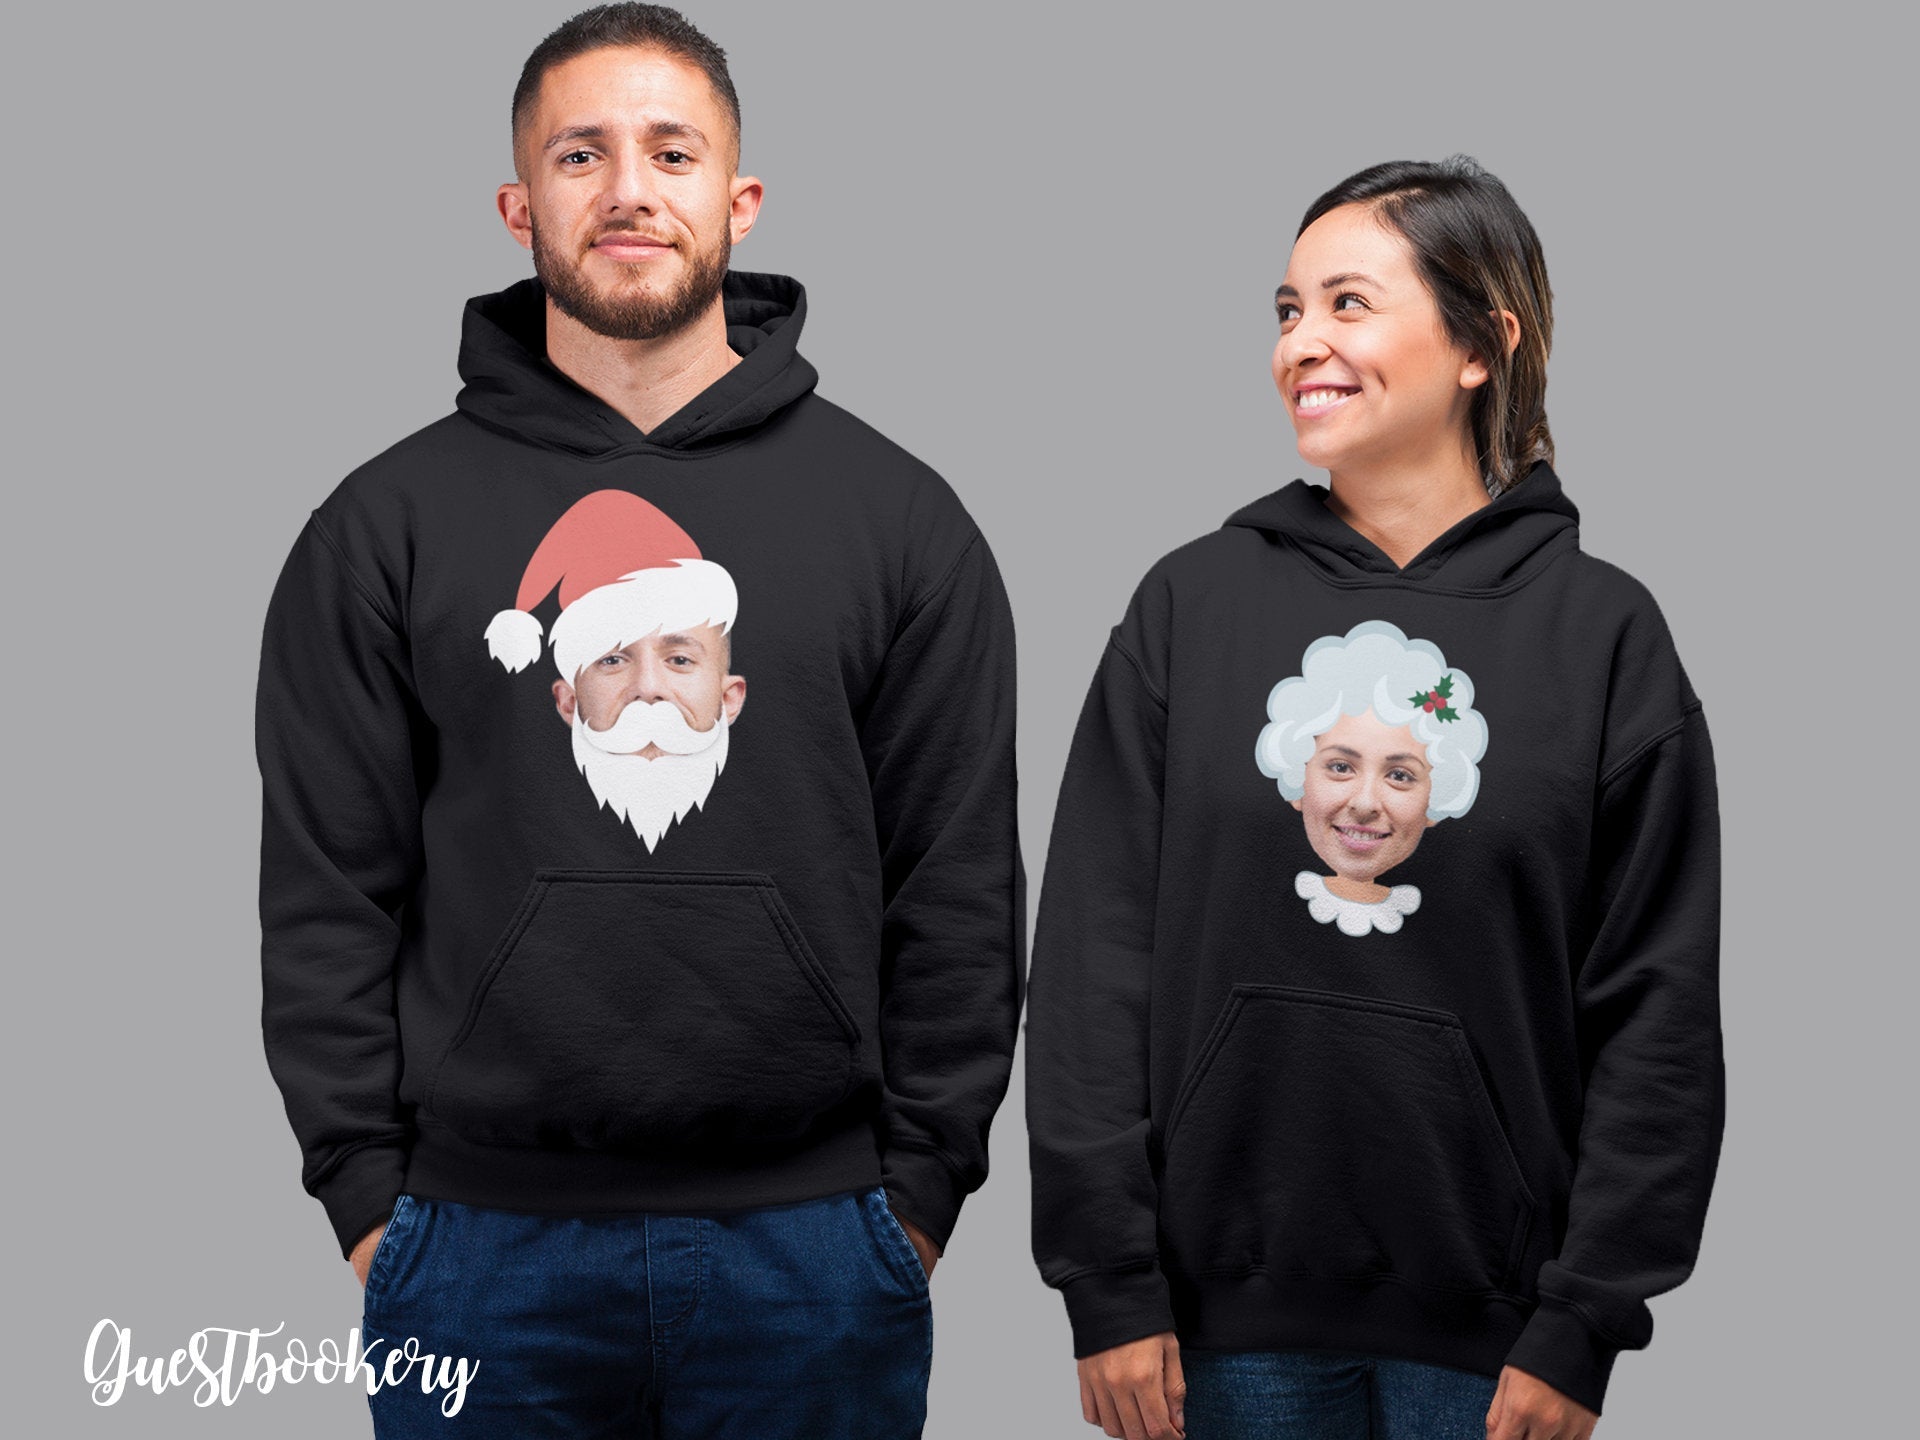 Custom Faces Mr. & Mrs. Claus Hoodies - Guestbookery